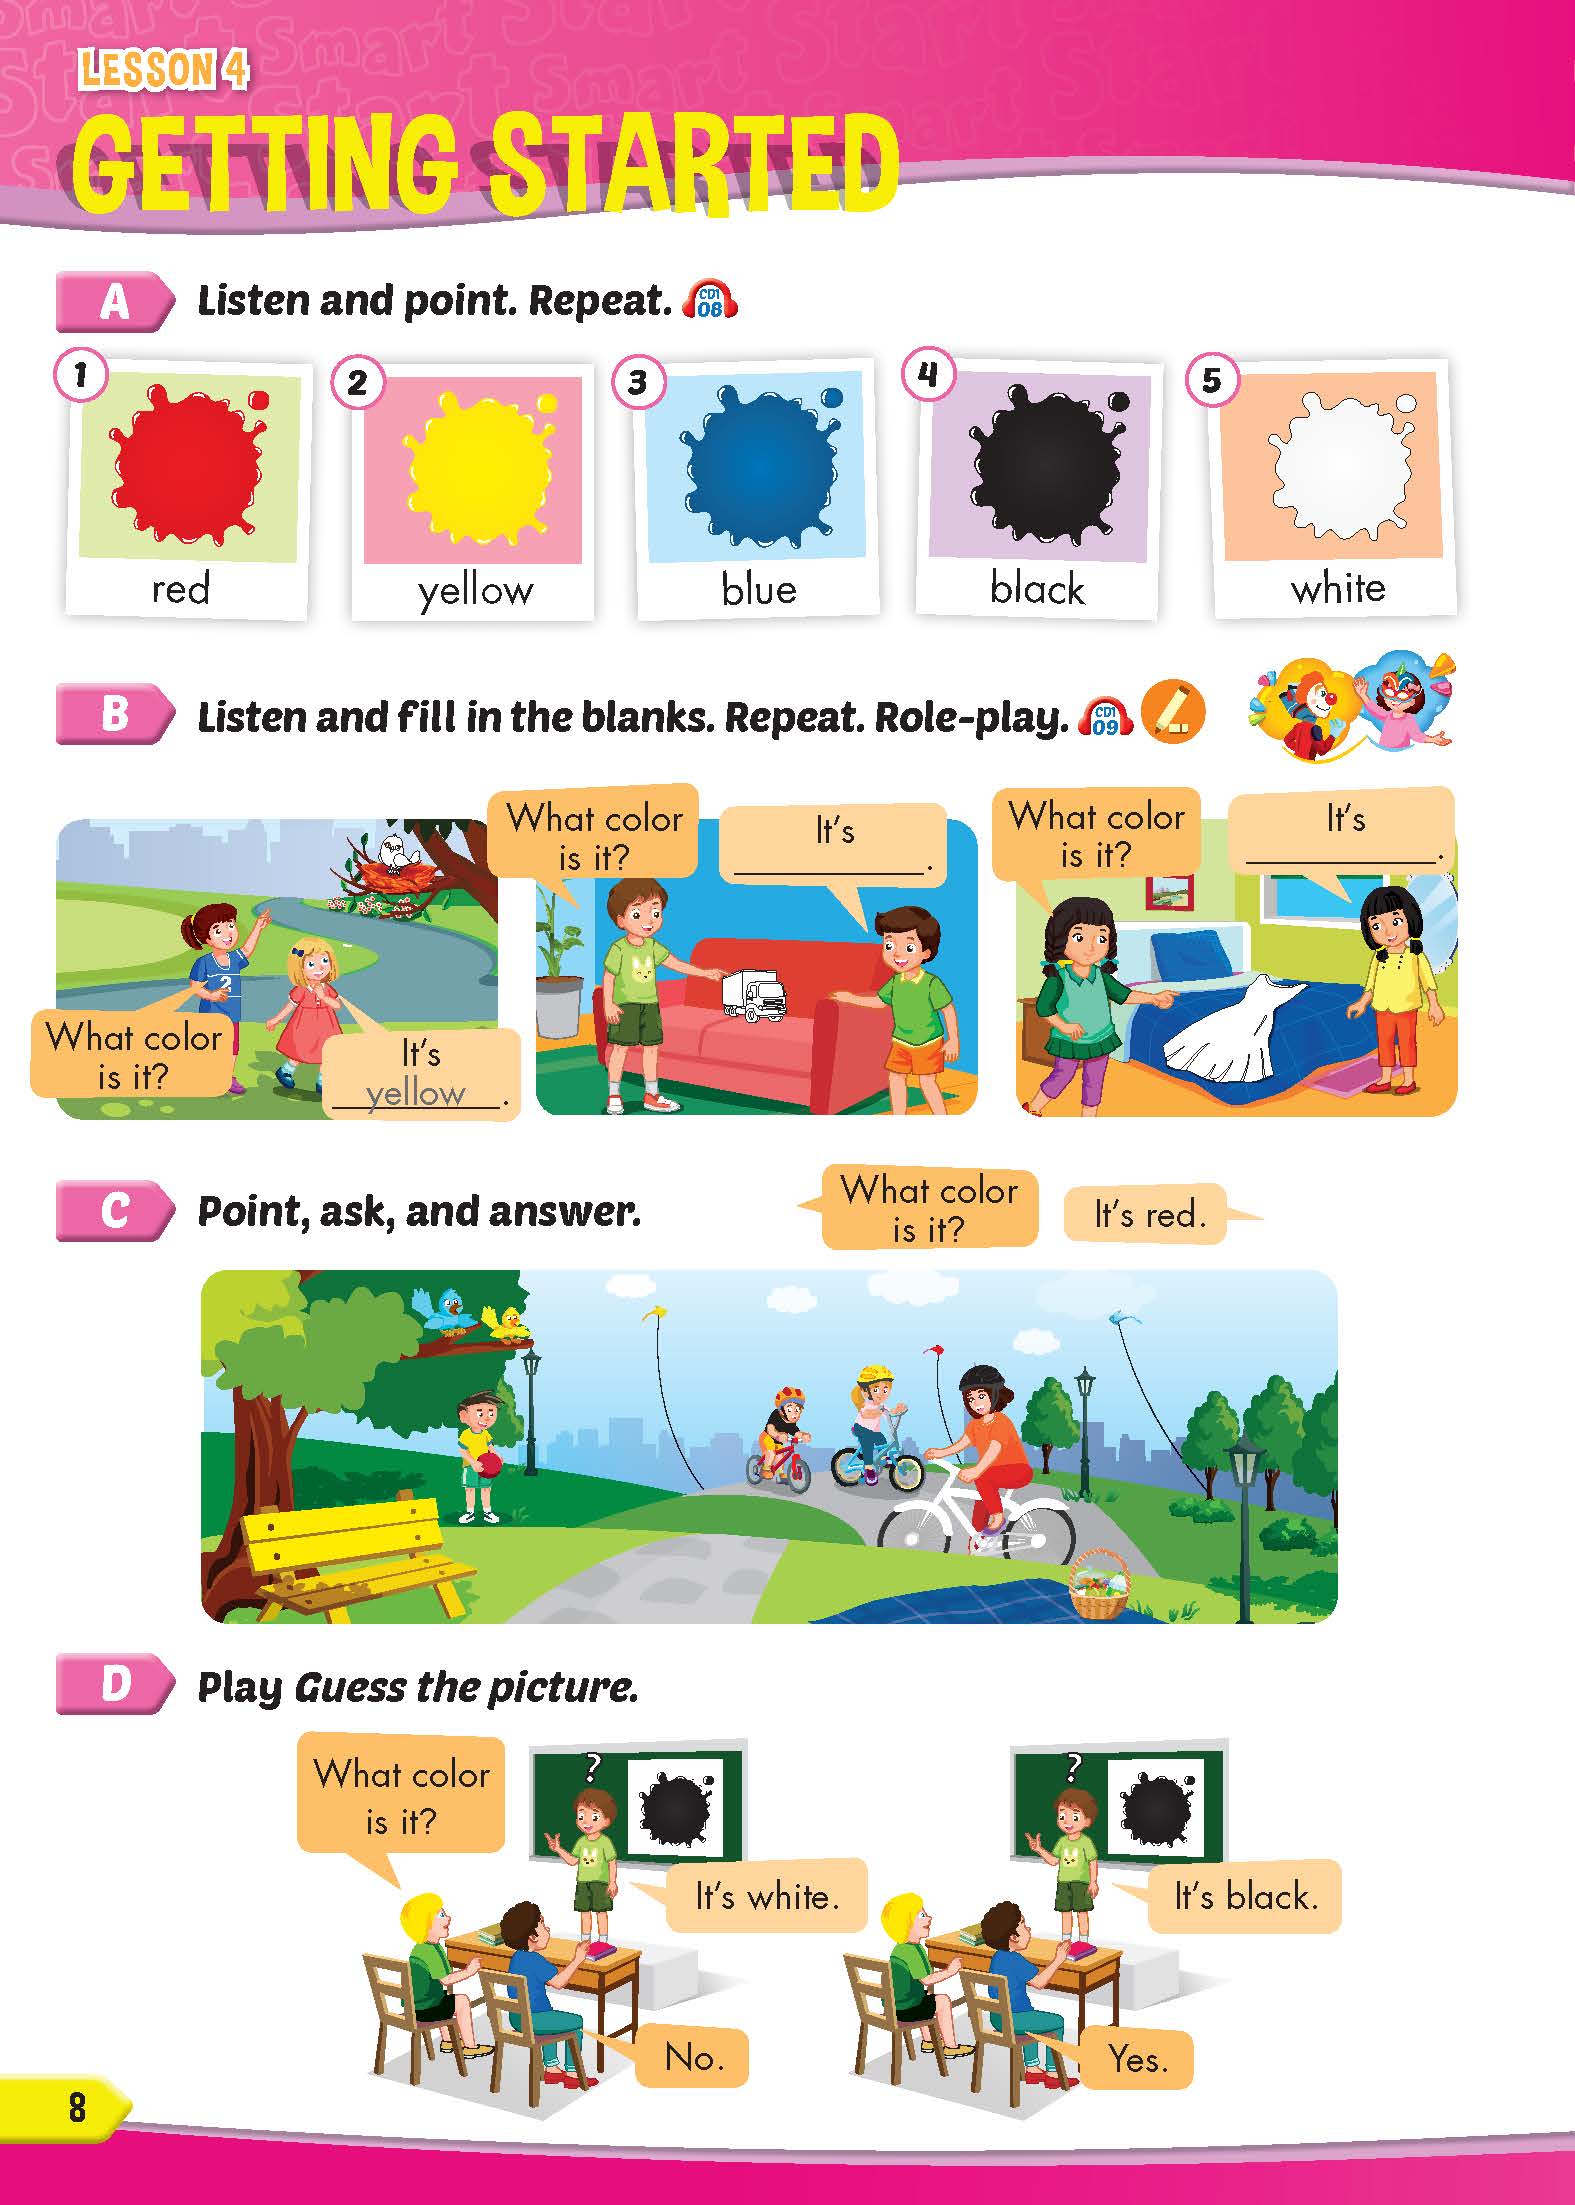 Tiếng Anh 3 i-Learn Smart Start Student's Book (Sách học sinh)